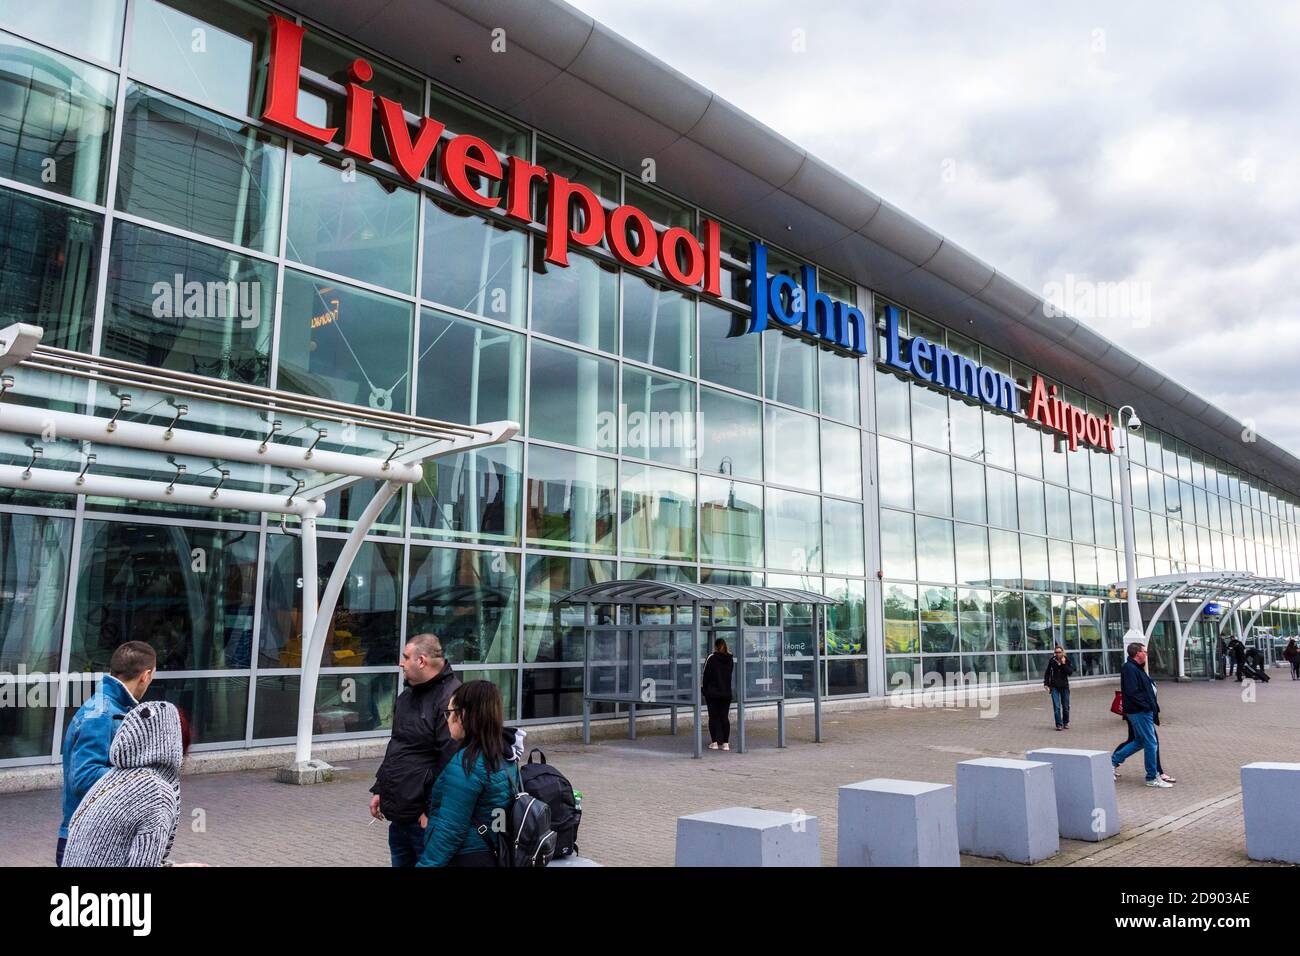 Liverpool John Lennon Airport. Frontage exterior shot of the International airport. Stock Photo